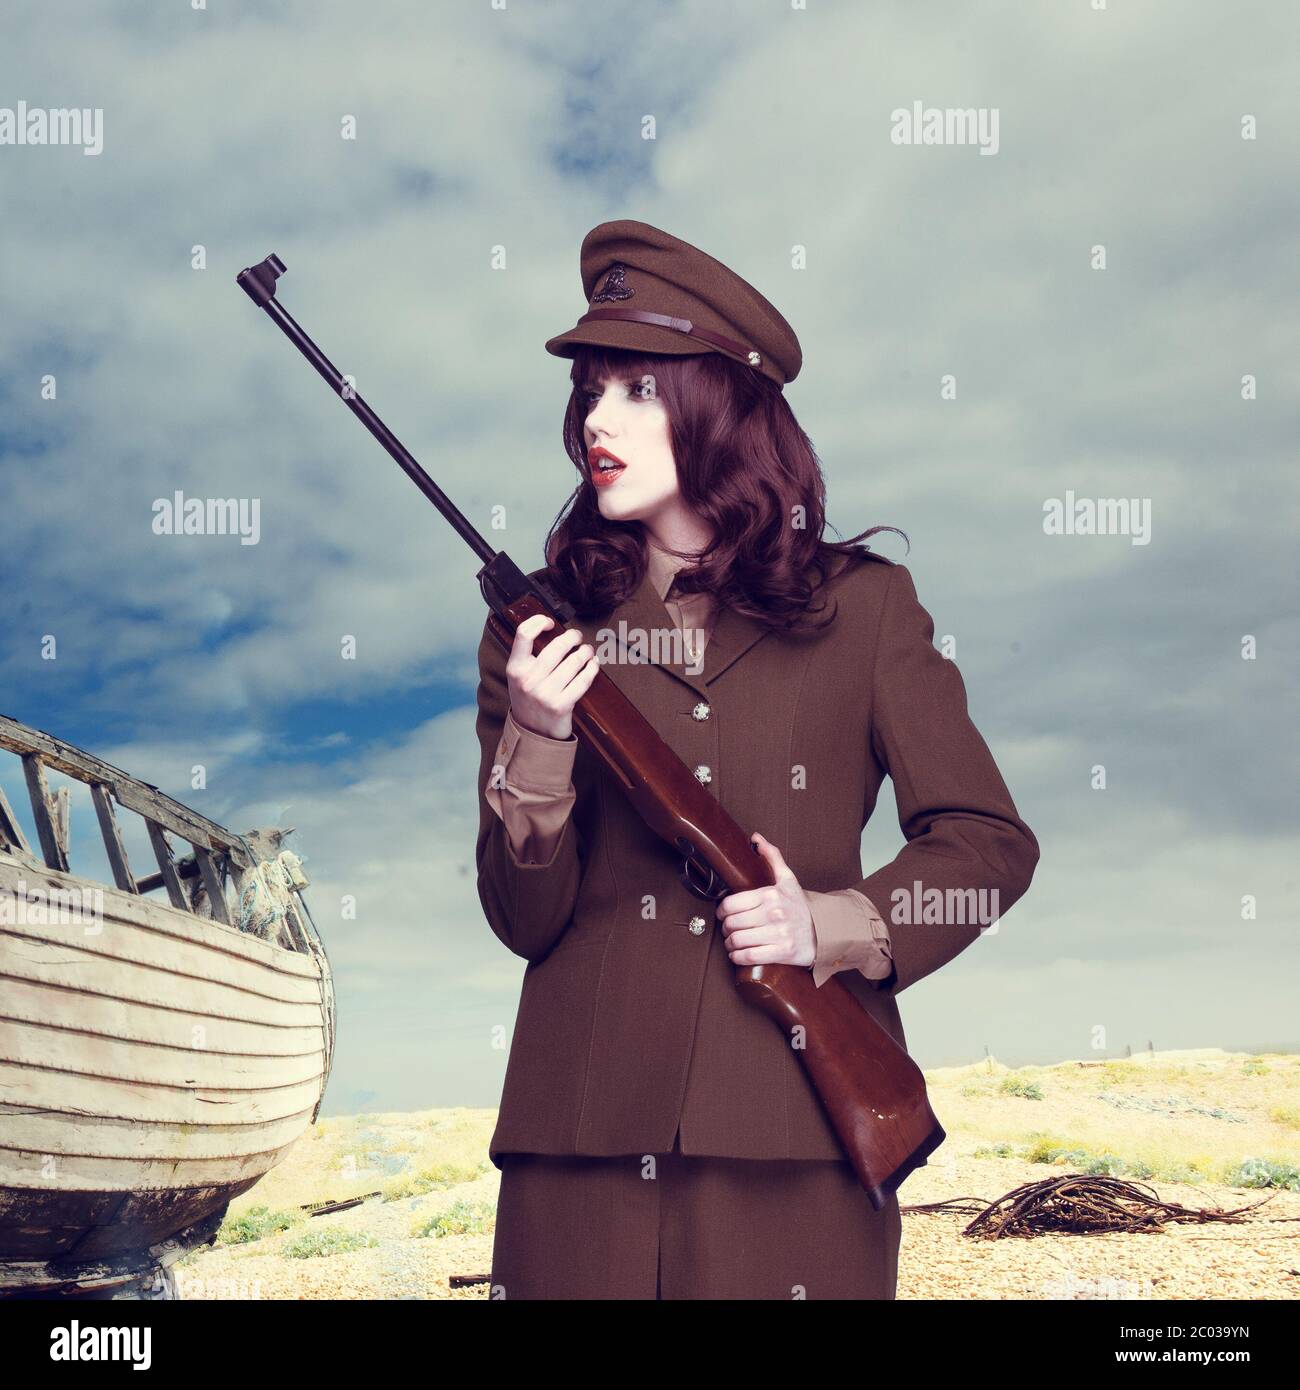 Attractive woman in army uniform carrying a rifle Stock Photo